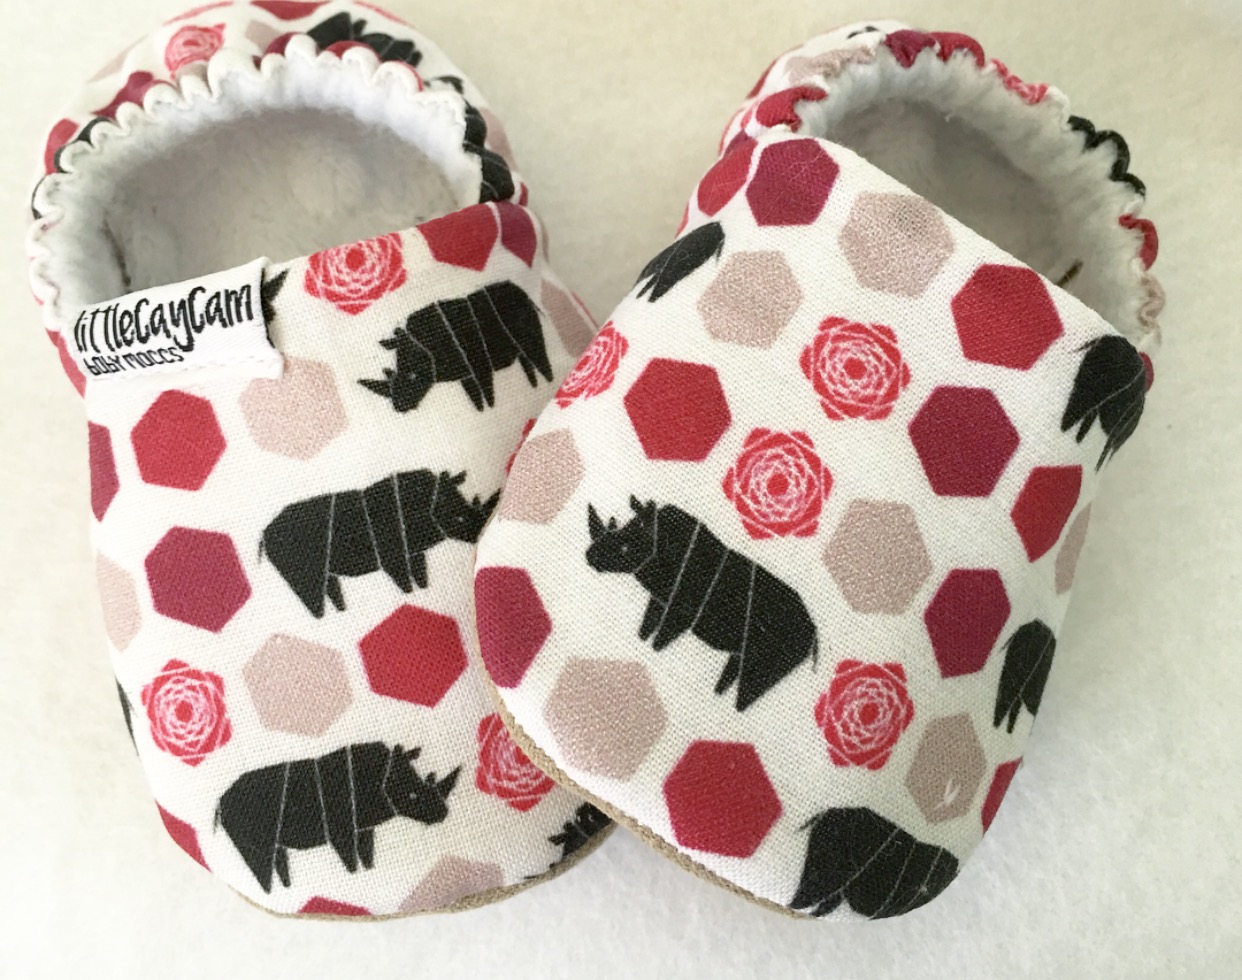 Baby shoes made from Lellobird fabric by Casey Dumadag